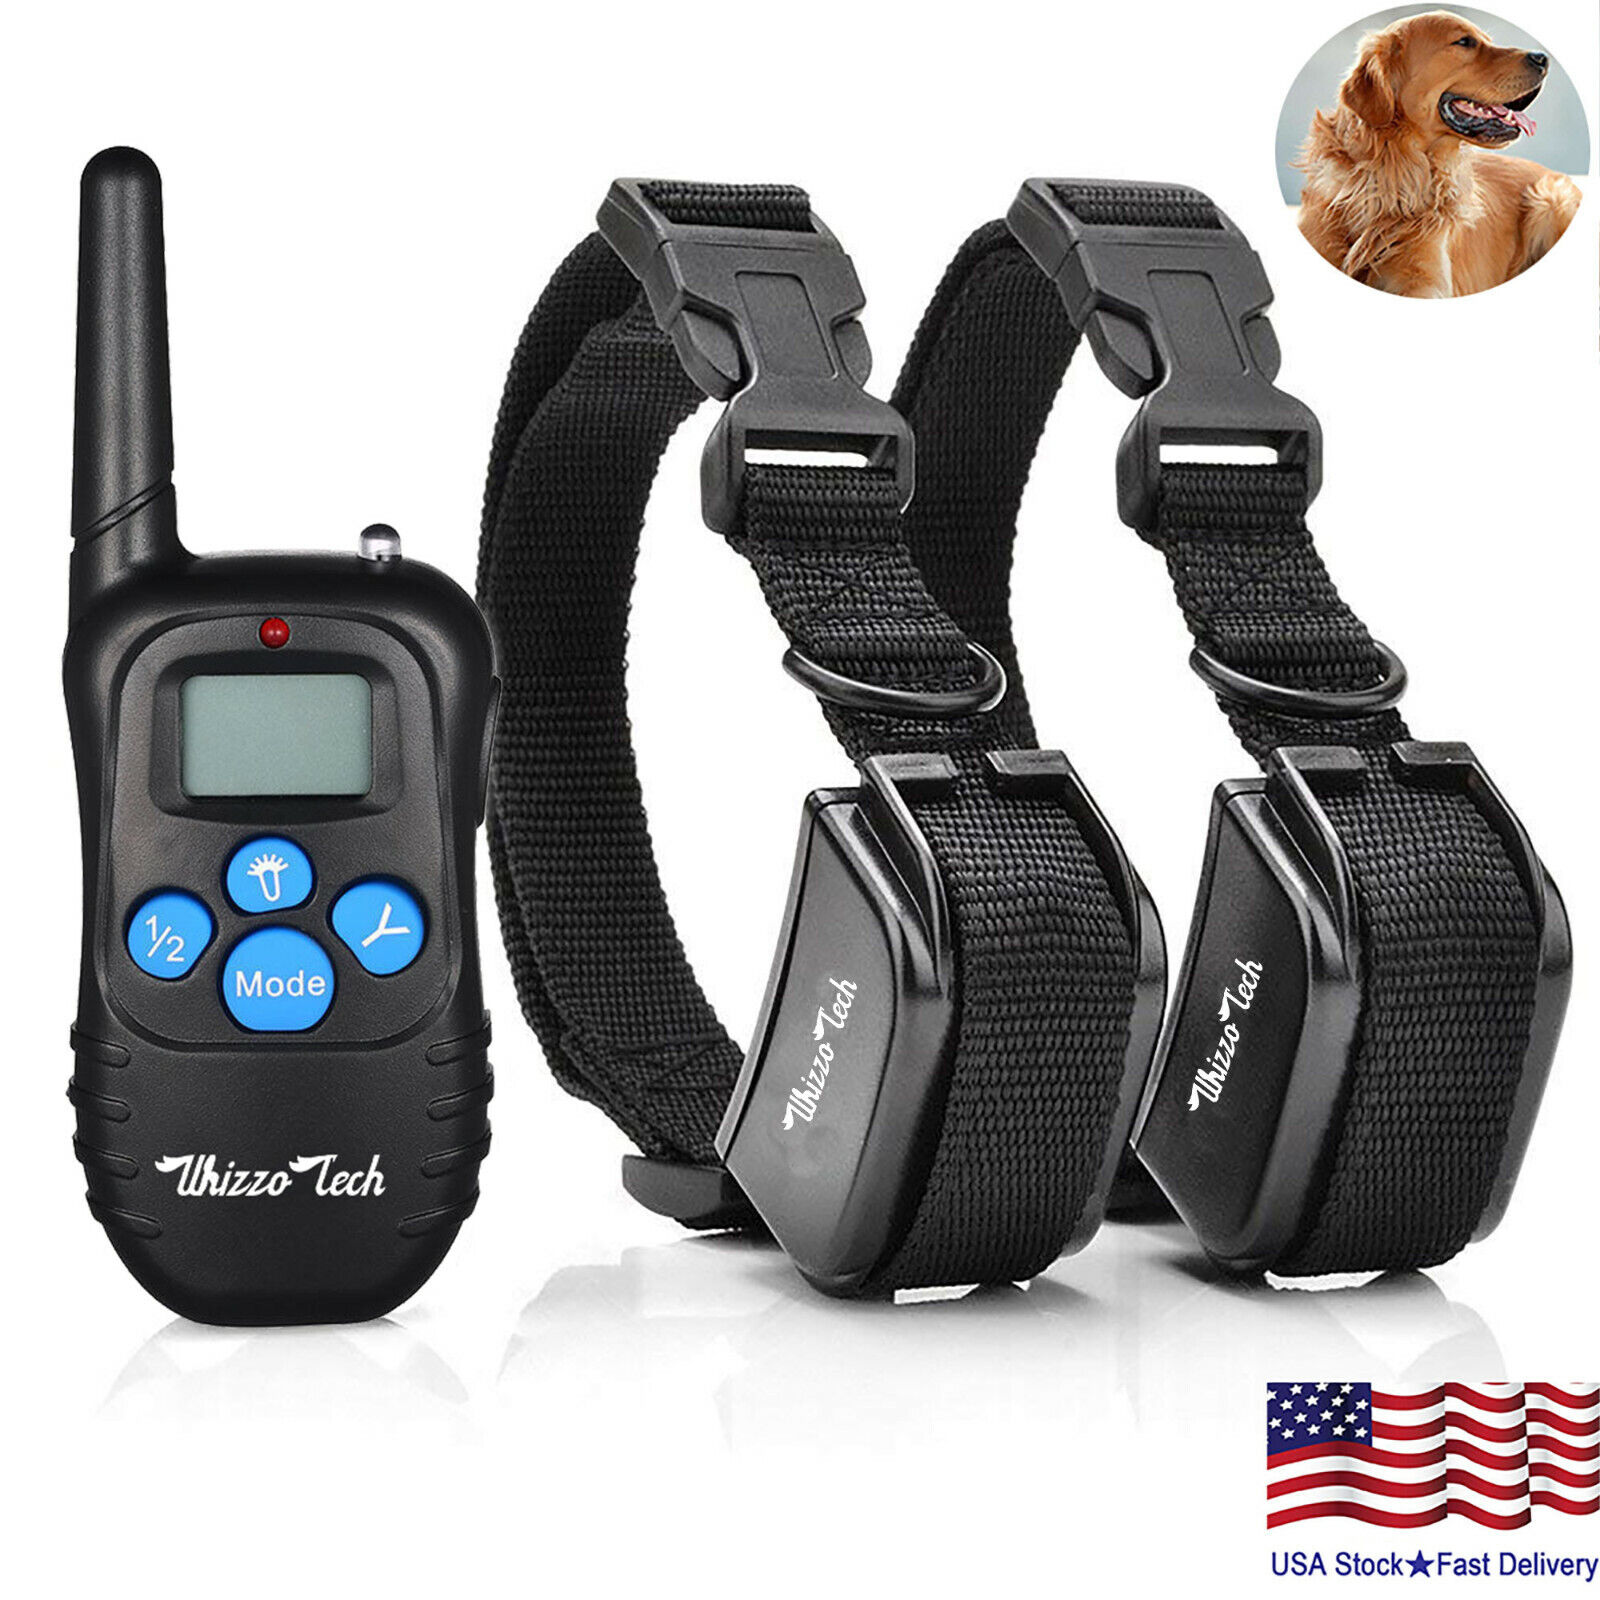 Dog Shock Training Collar Rechargeable LCD Remote Control 330 Yards WhizzoTech